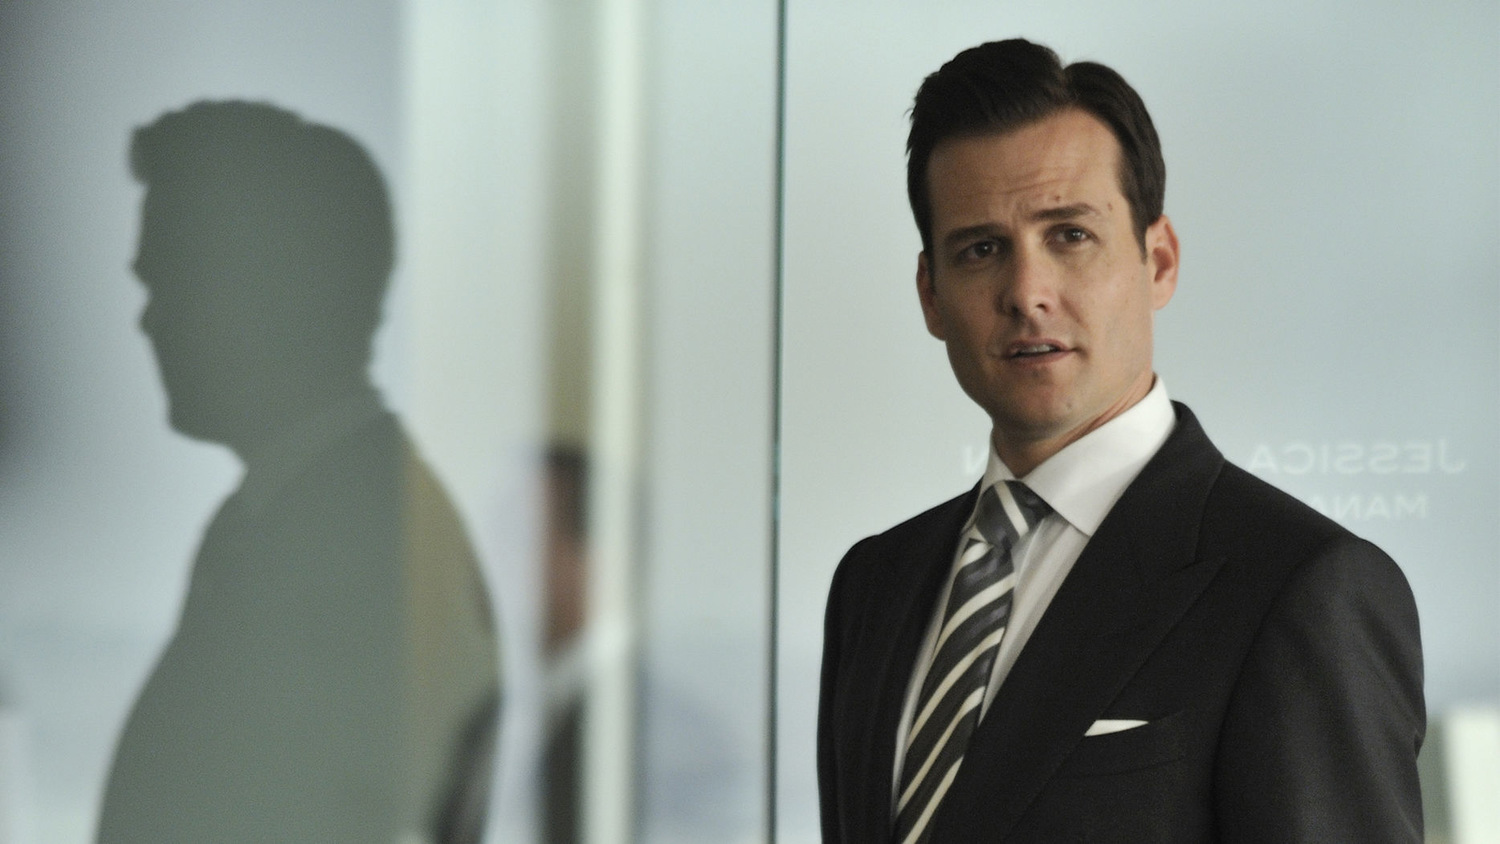 Suits' Gabriel Macht Starred in Sex and the City, but No One Noticed